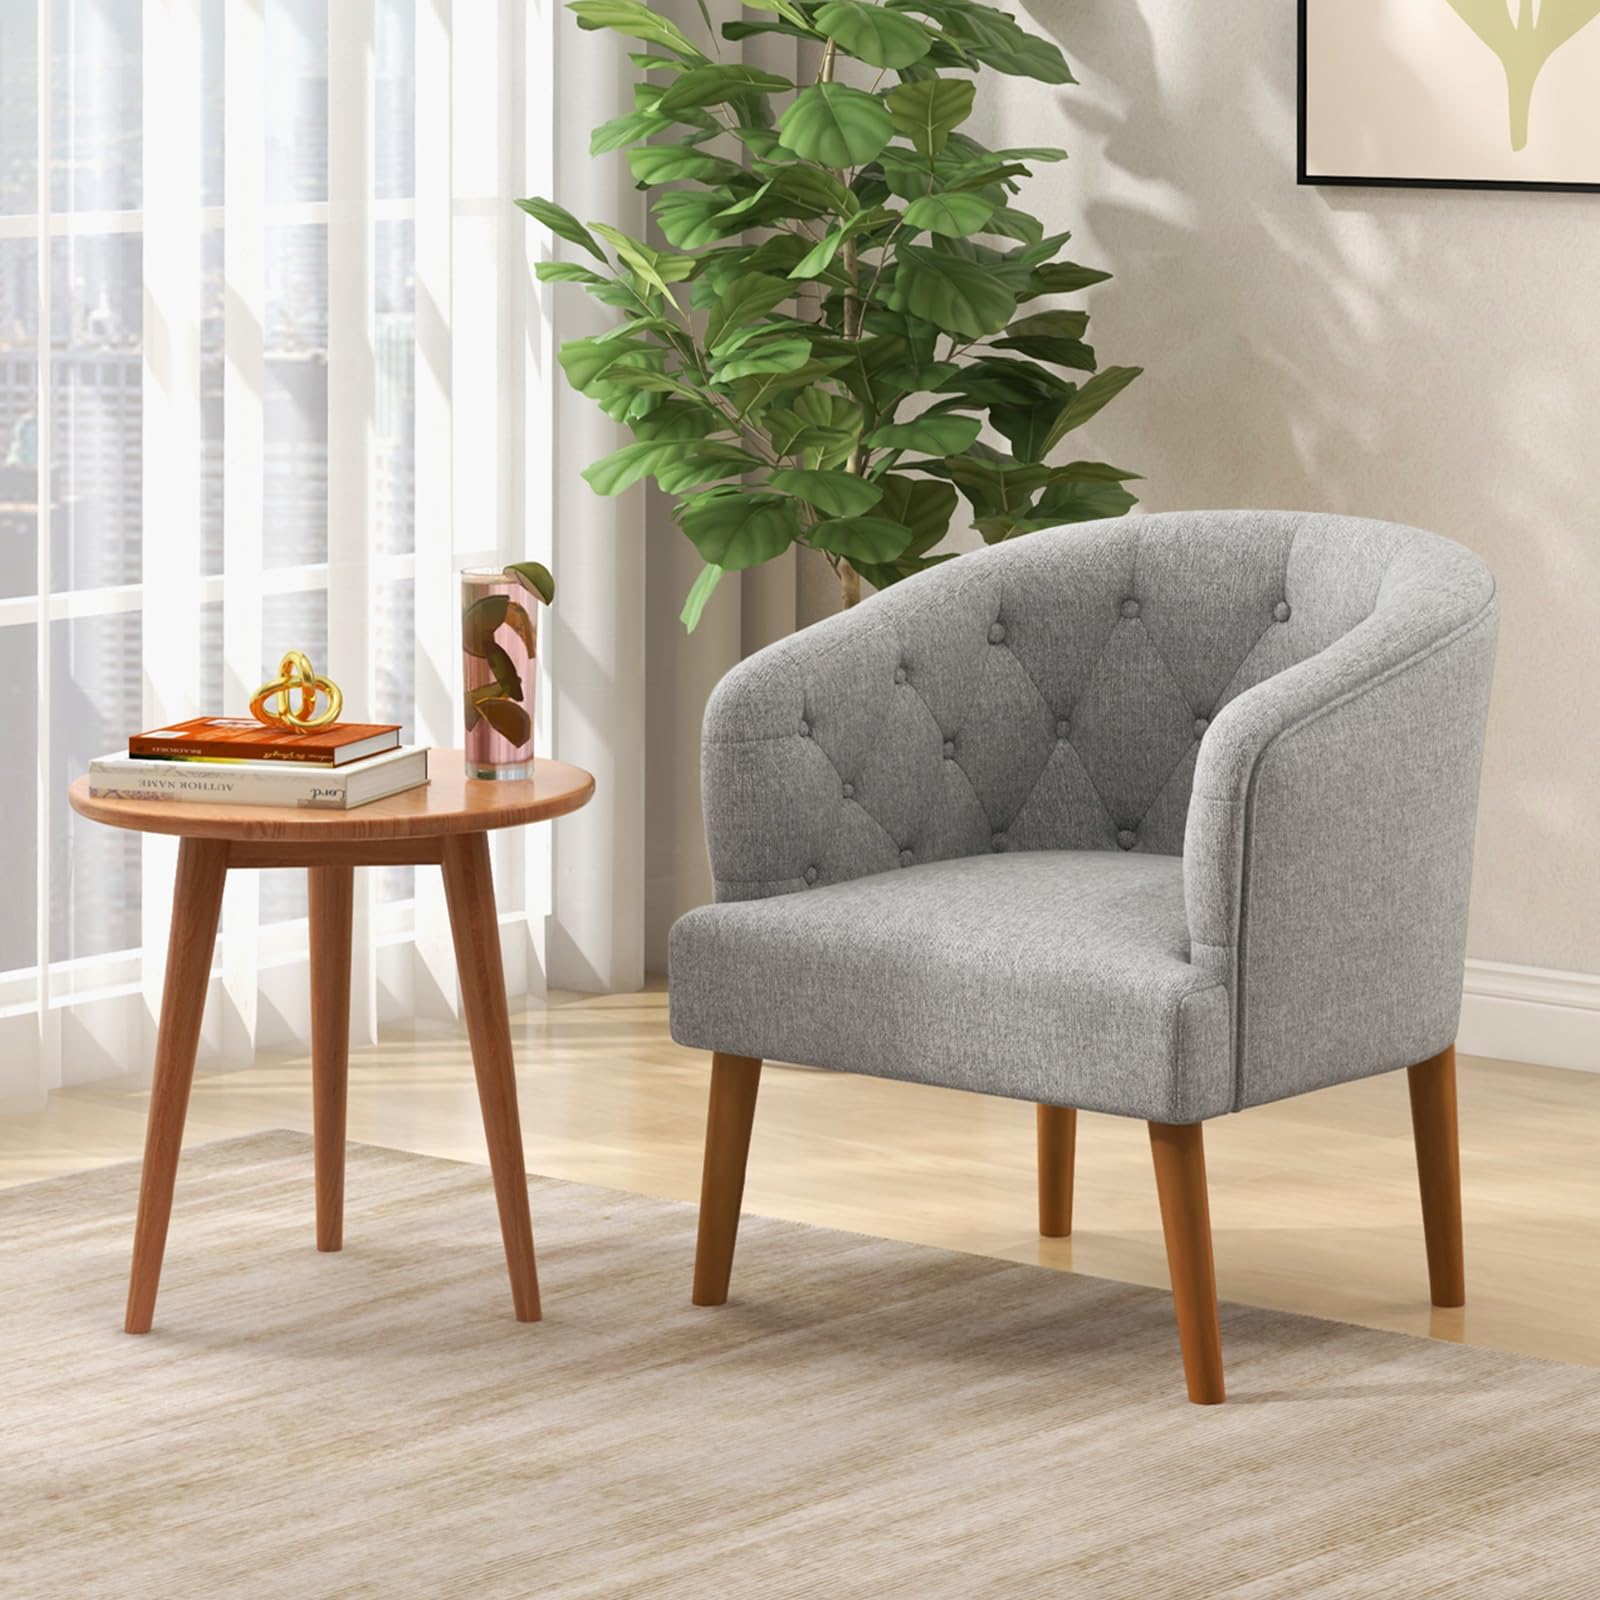 Giantex Tufted Accent Chair Set of 1 or 2 Grey, Upholstered Accent Armchair with Rubber Wood Legs